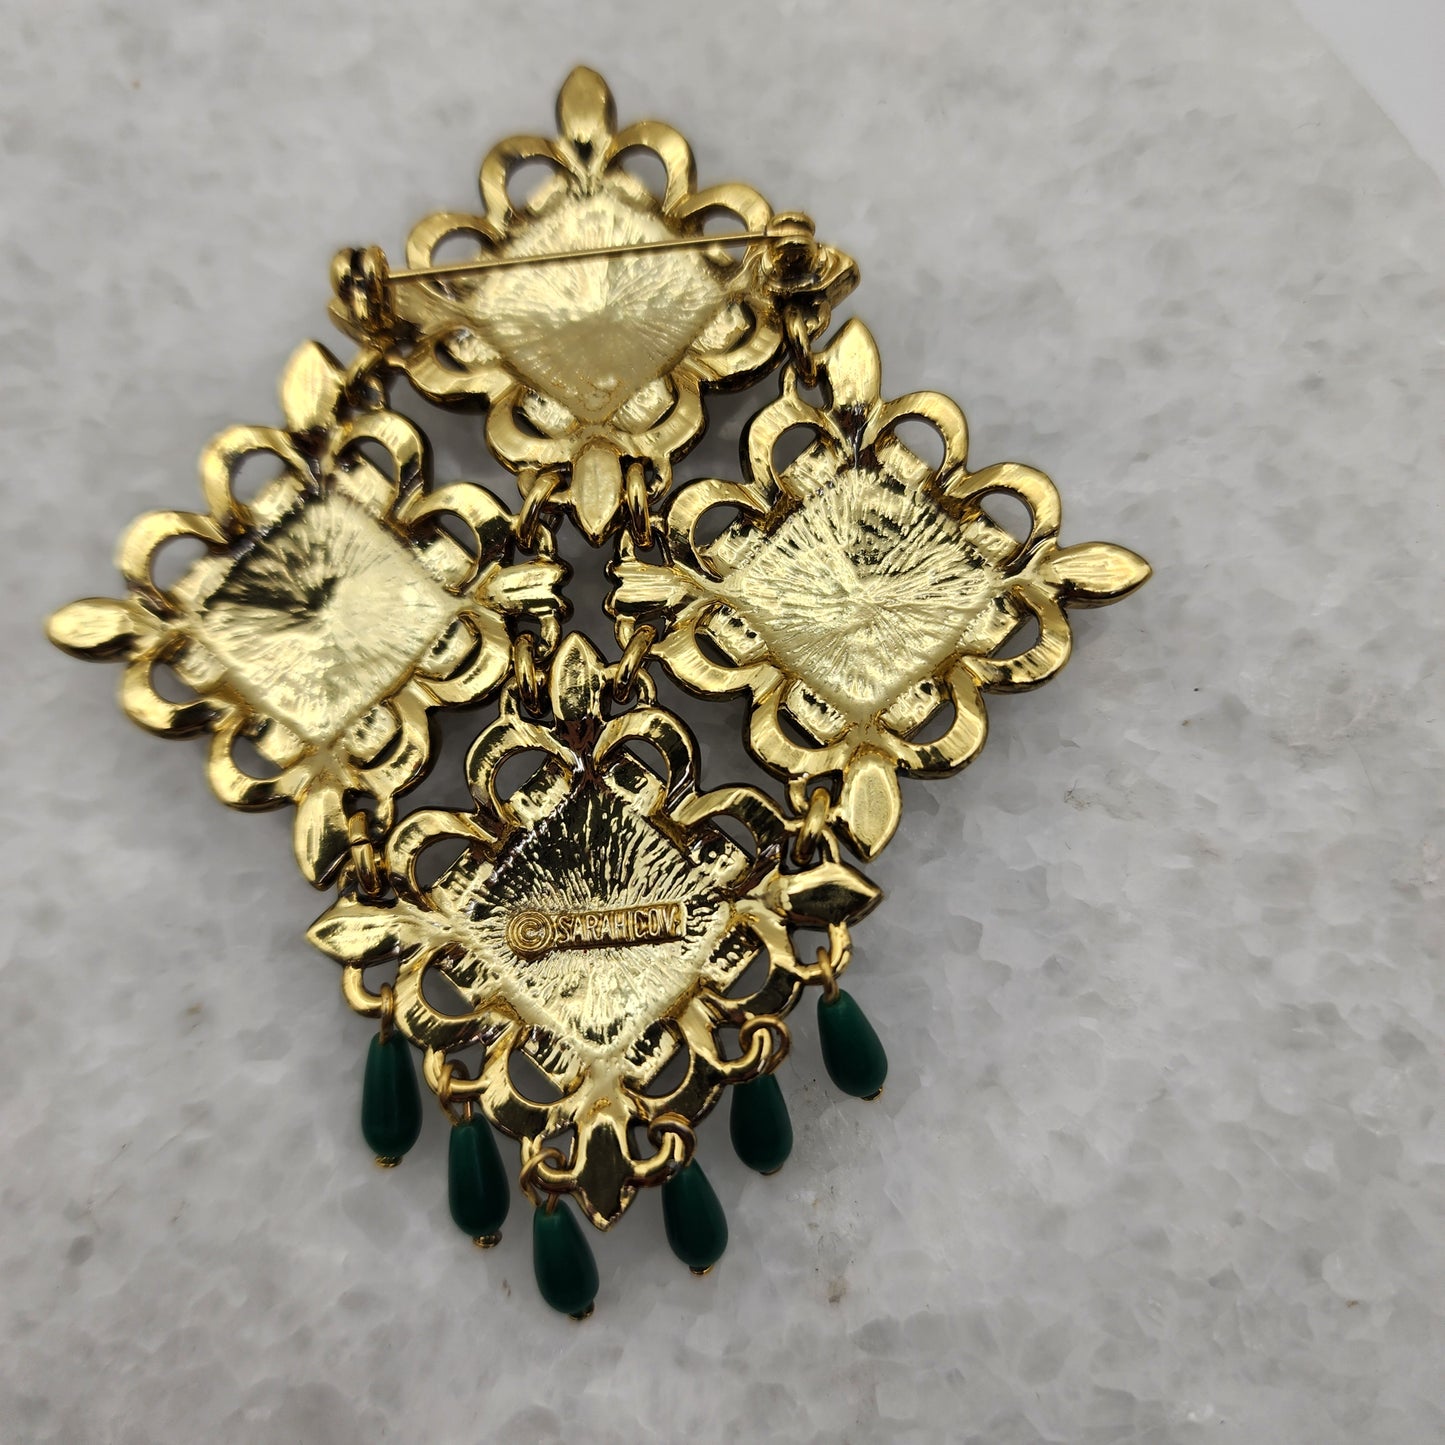 Vintage Sarah Coventry Temple Lights Brooch